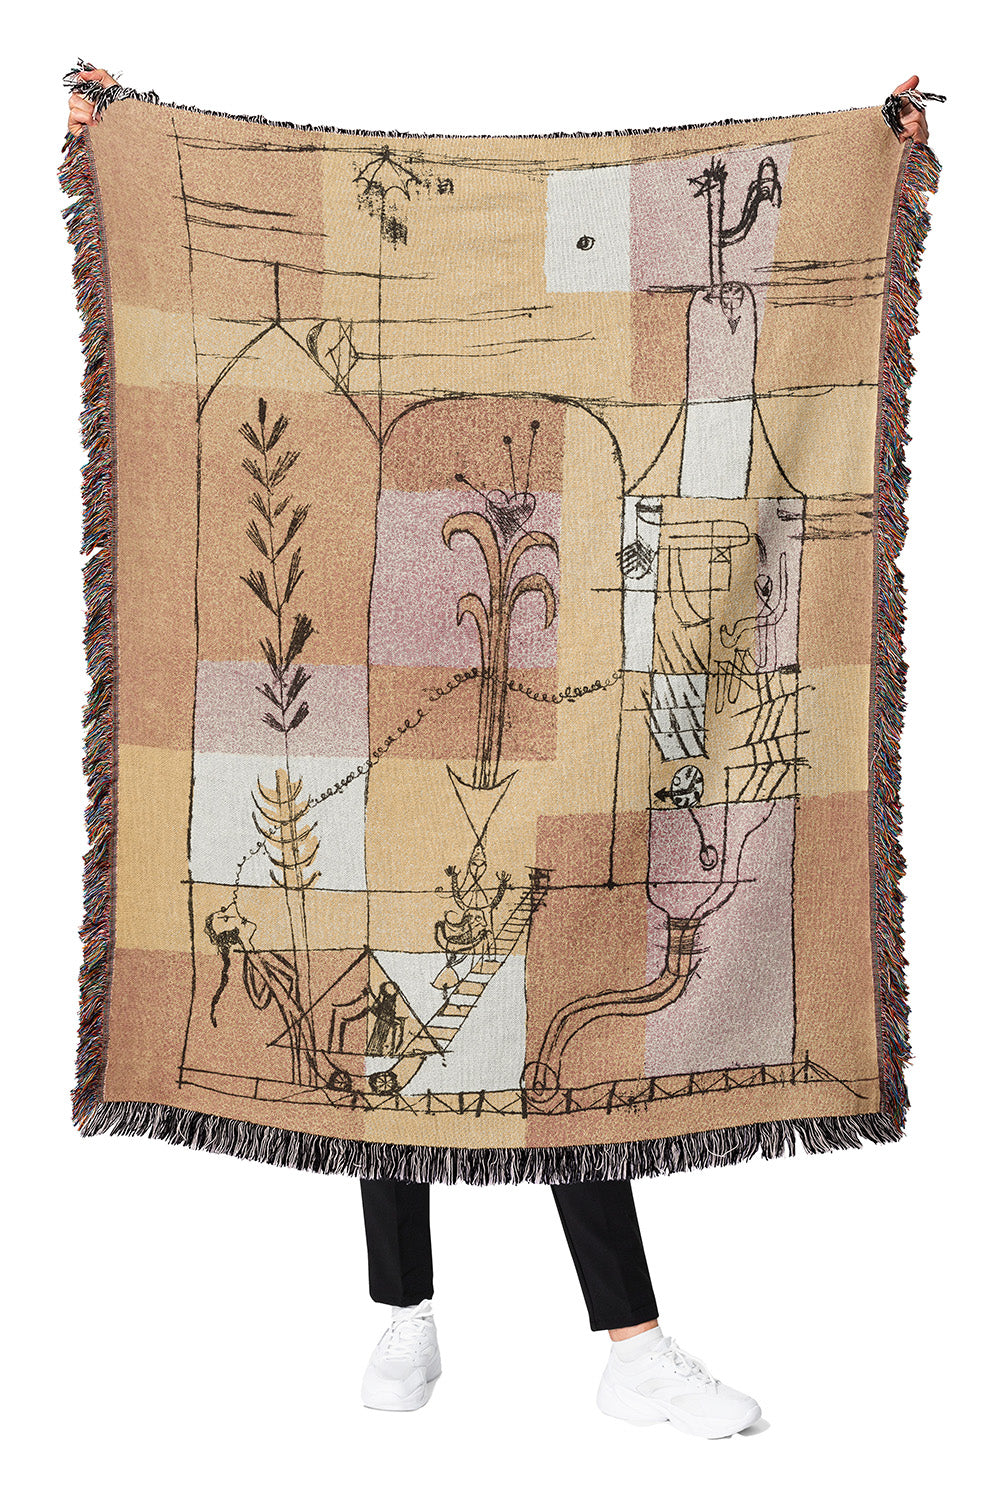 Woven Blanket Featuring Paul Klee's 'In the Spirit of Hoffmann' (1921)